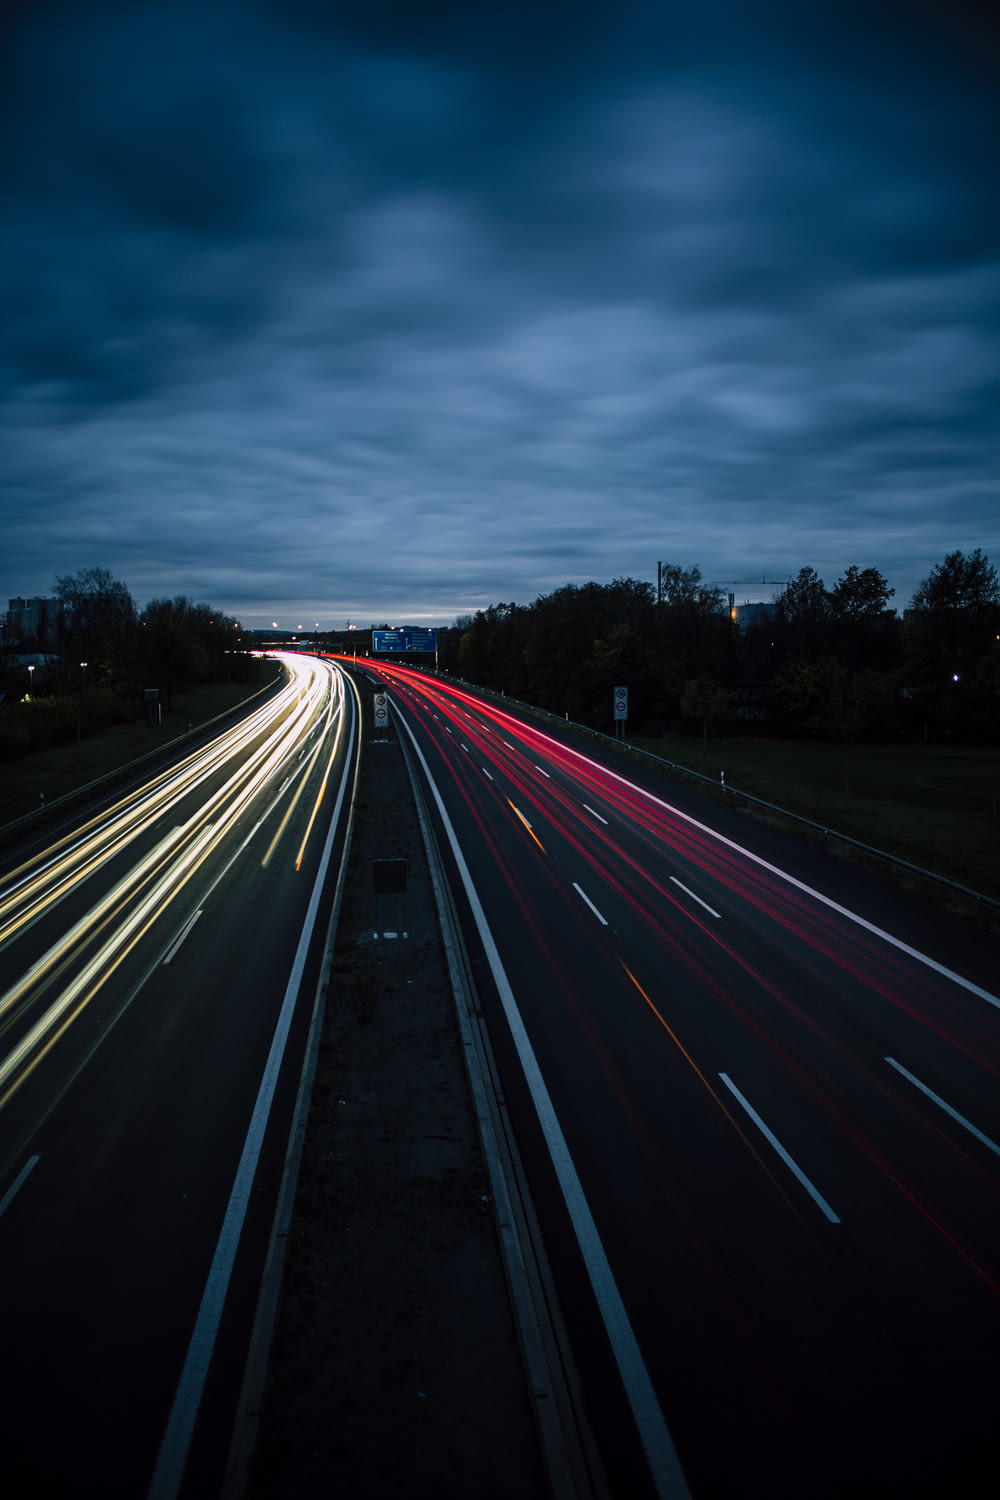 time-lapse photography of vehicle lights on road